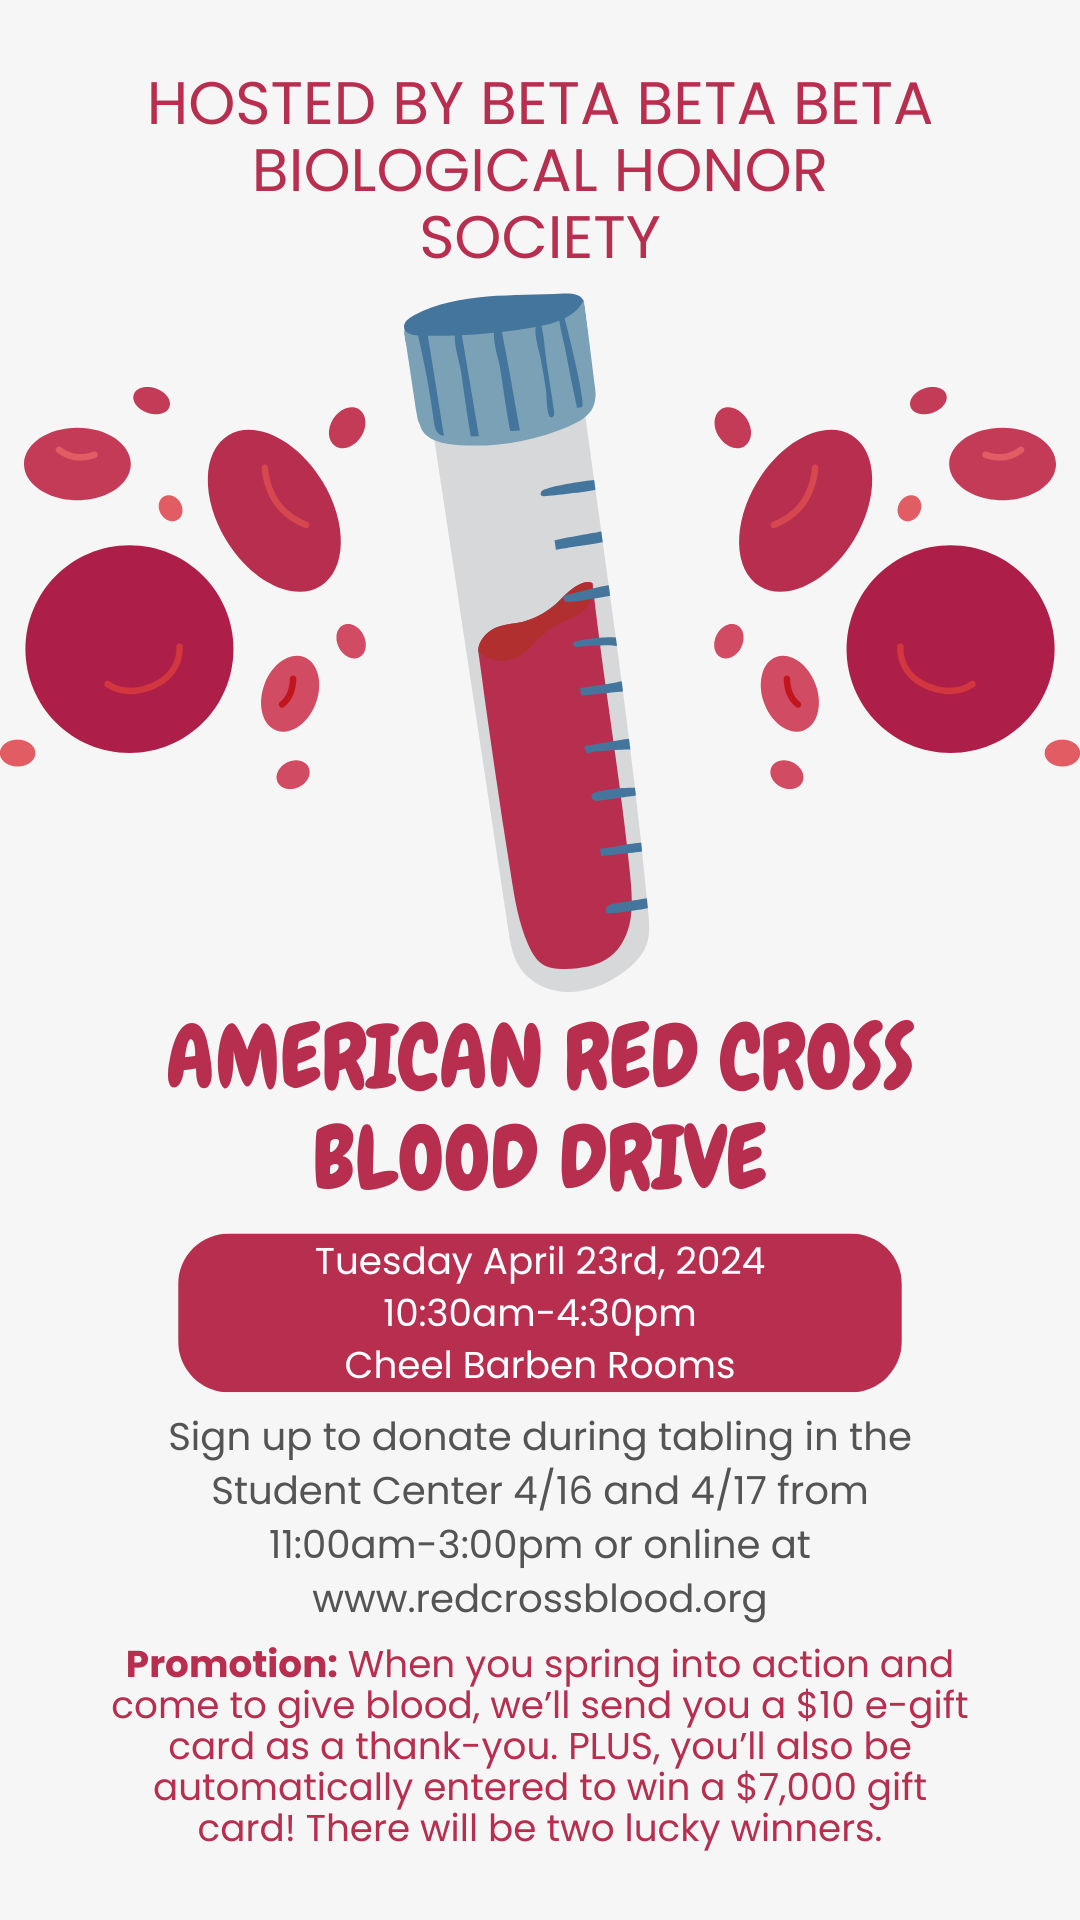 The flyer is tan with red blood cells and a test tube of blood. Hosted by Beta Beta Beta Biological Honor Society, American Red Cross Blood Drive, Tuesday April 23rd, 2024, 10:30am-4:30pm, Cheel Barben Rooms, Sign up to donate during tabling in the Student Center 4/16 and 4/17 from 11:00am-3:00pm or online at www.redcrossblood.org, Promotion: When you spring into action and come to give blood, we'll send you a $10 e-gift card as a thank-you. Plus, you'll also be automatically entered to win a $7,000 gift card! There will be two lucky winners.